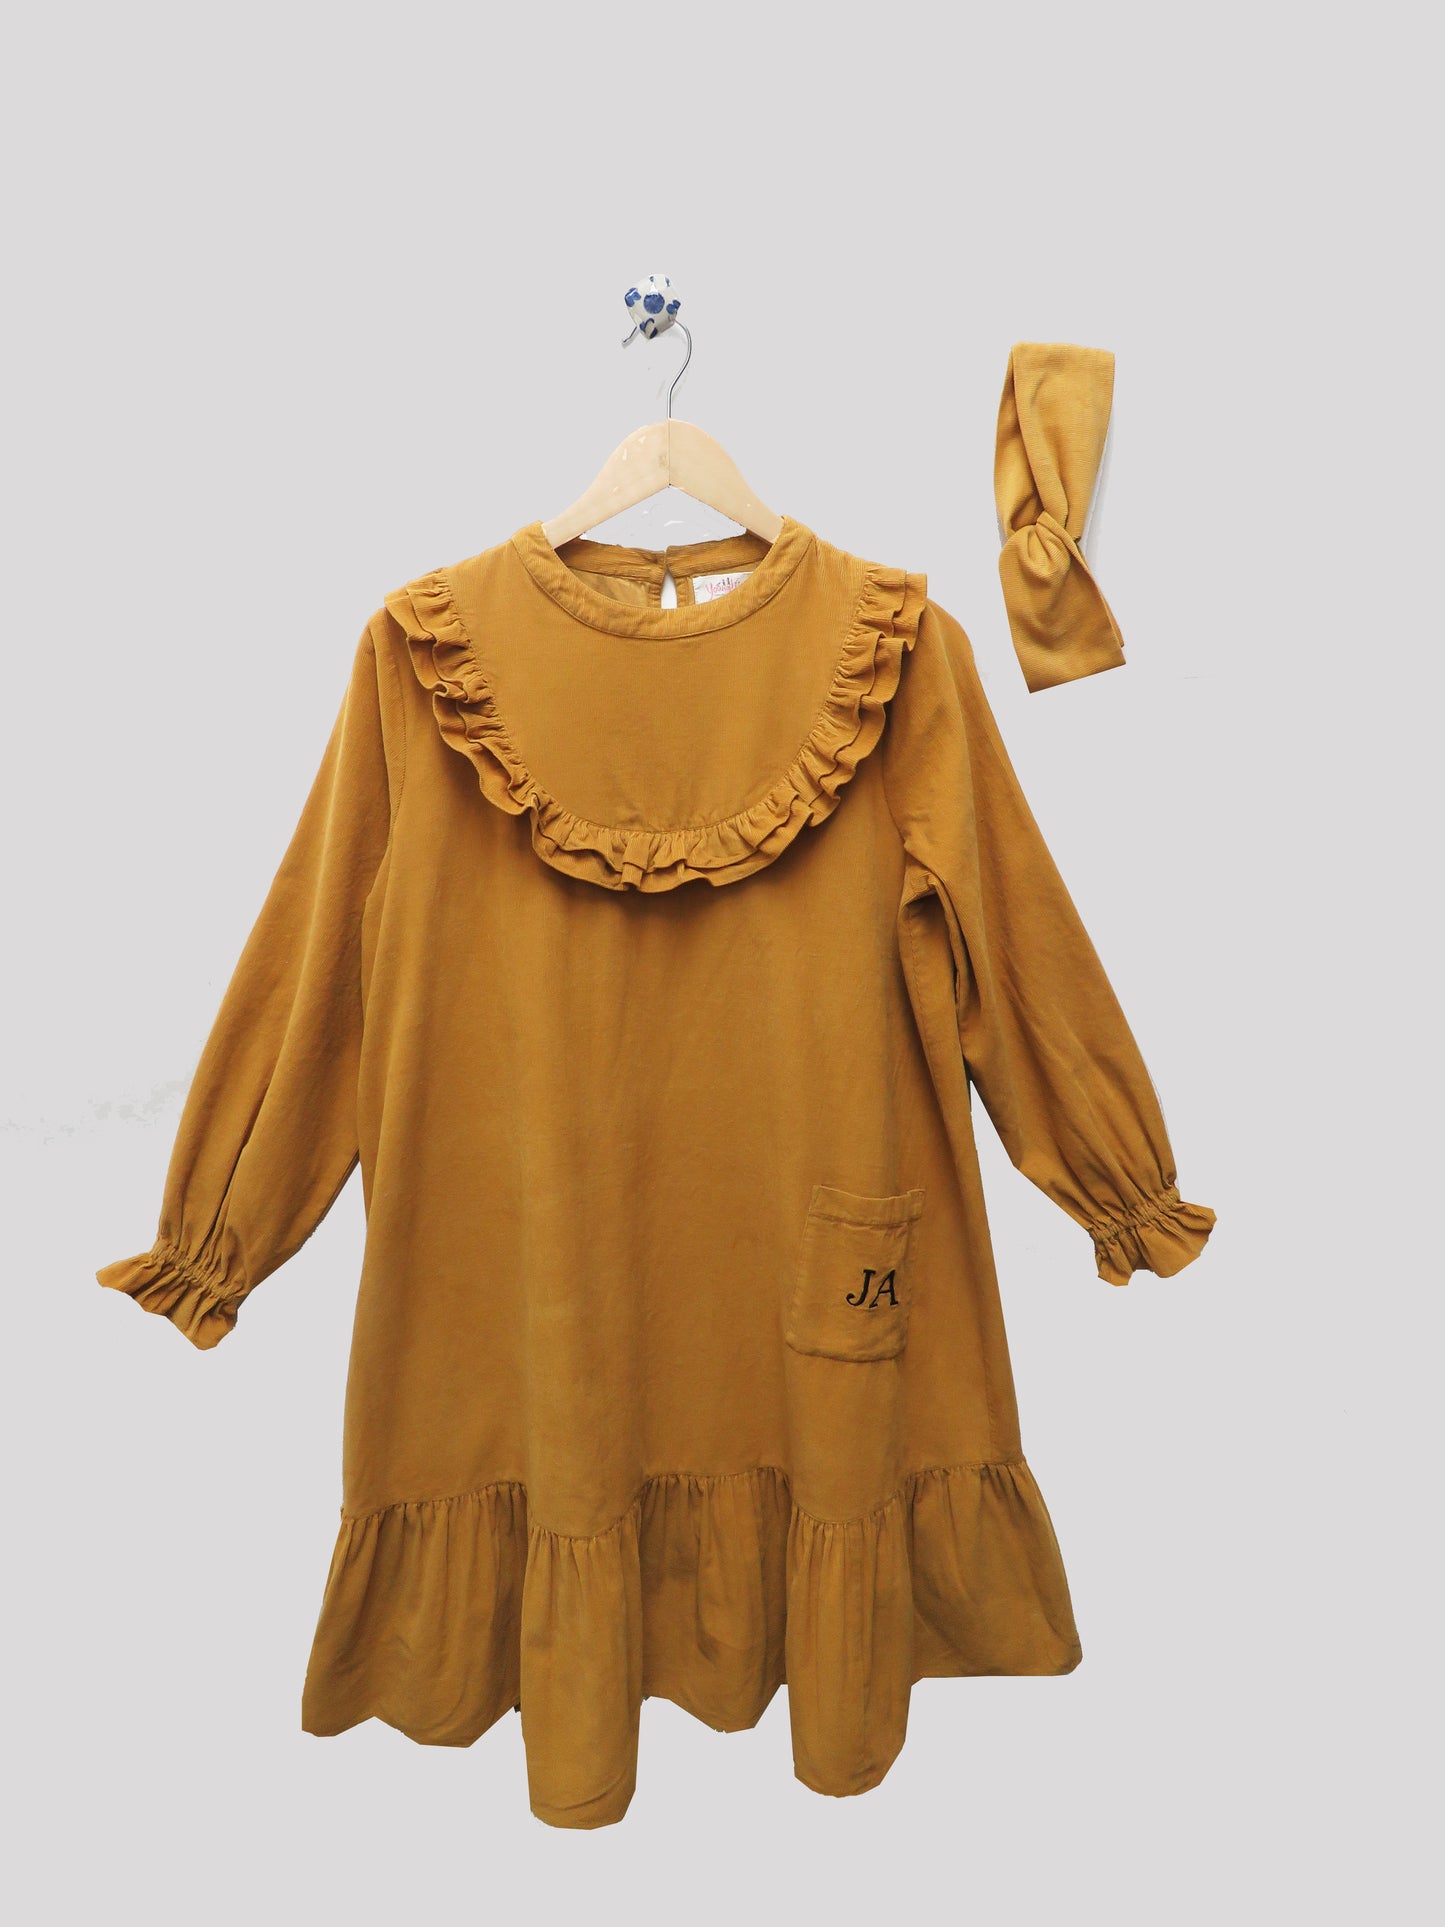 YELLOW SOFT AND COZY WINTER DRESS WITH MATCHING HAIRBAND AND PERSONALISED POCKETS (LENGTH CAN BE CUSTOMIZED)